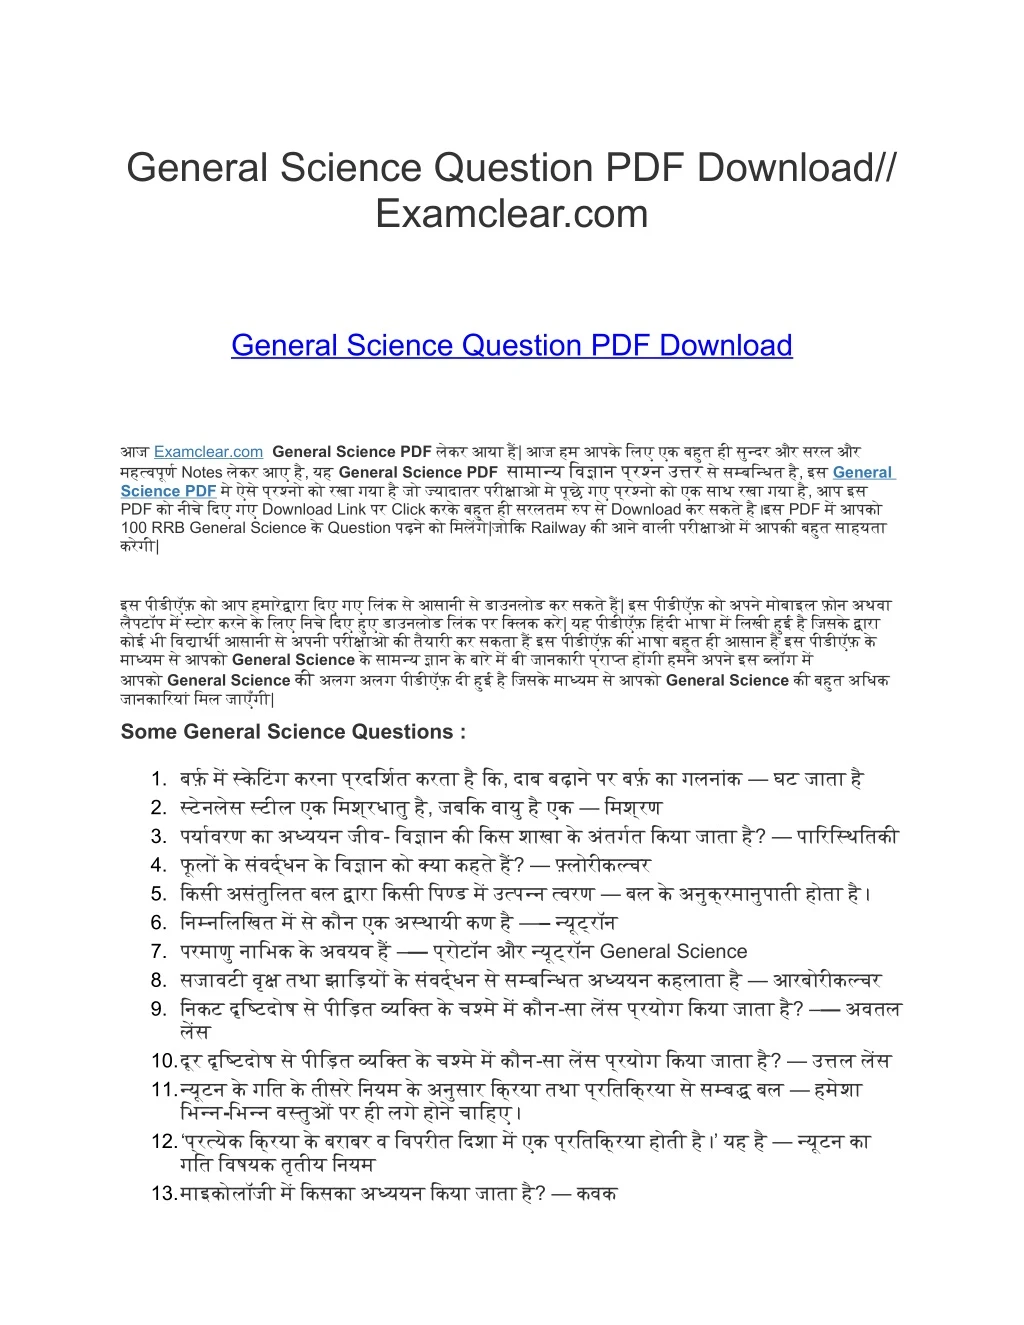 general science question pdf download examclear